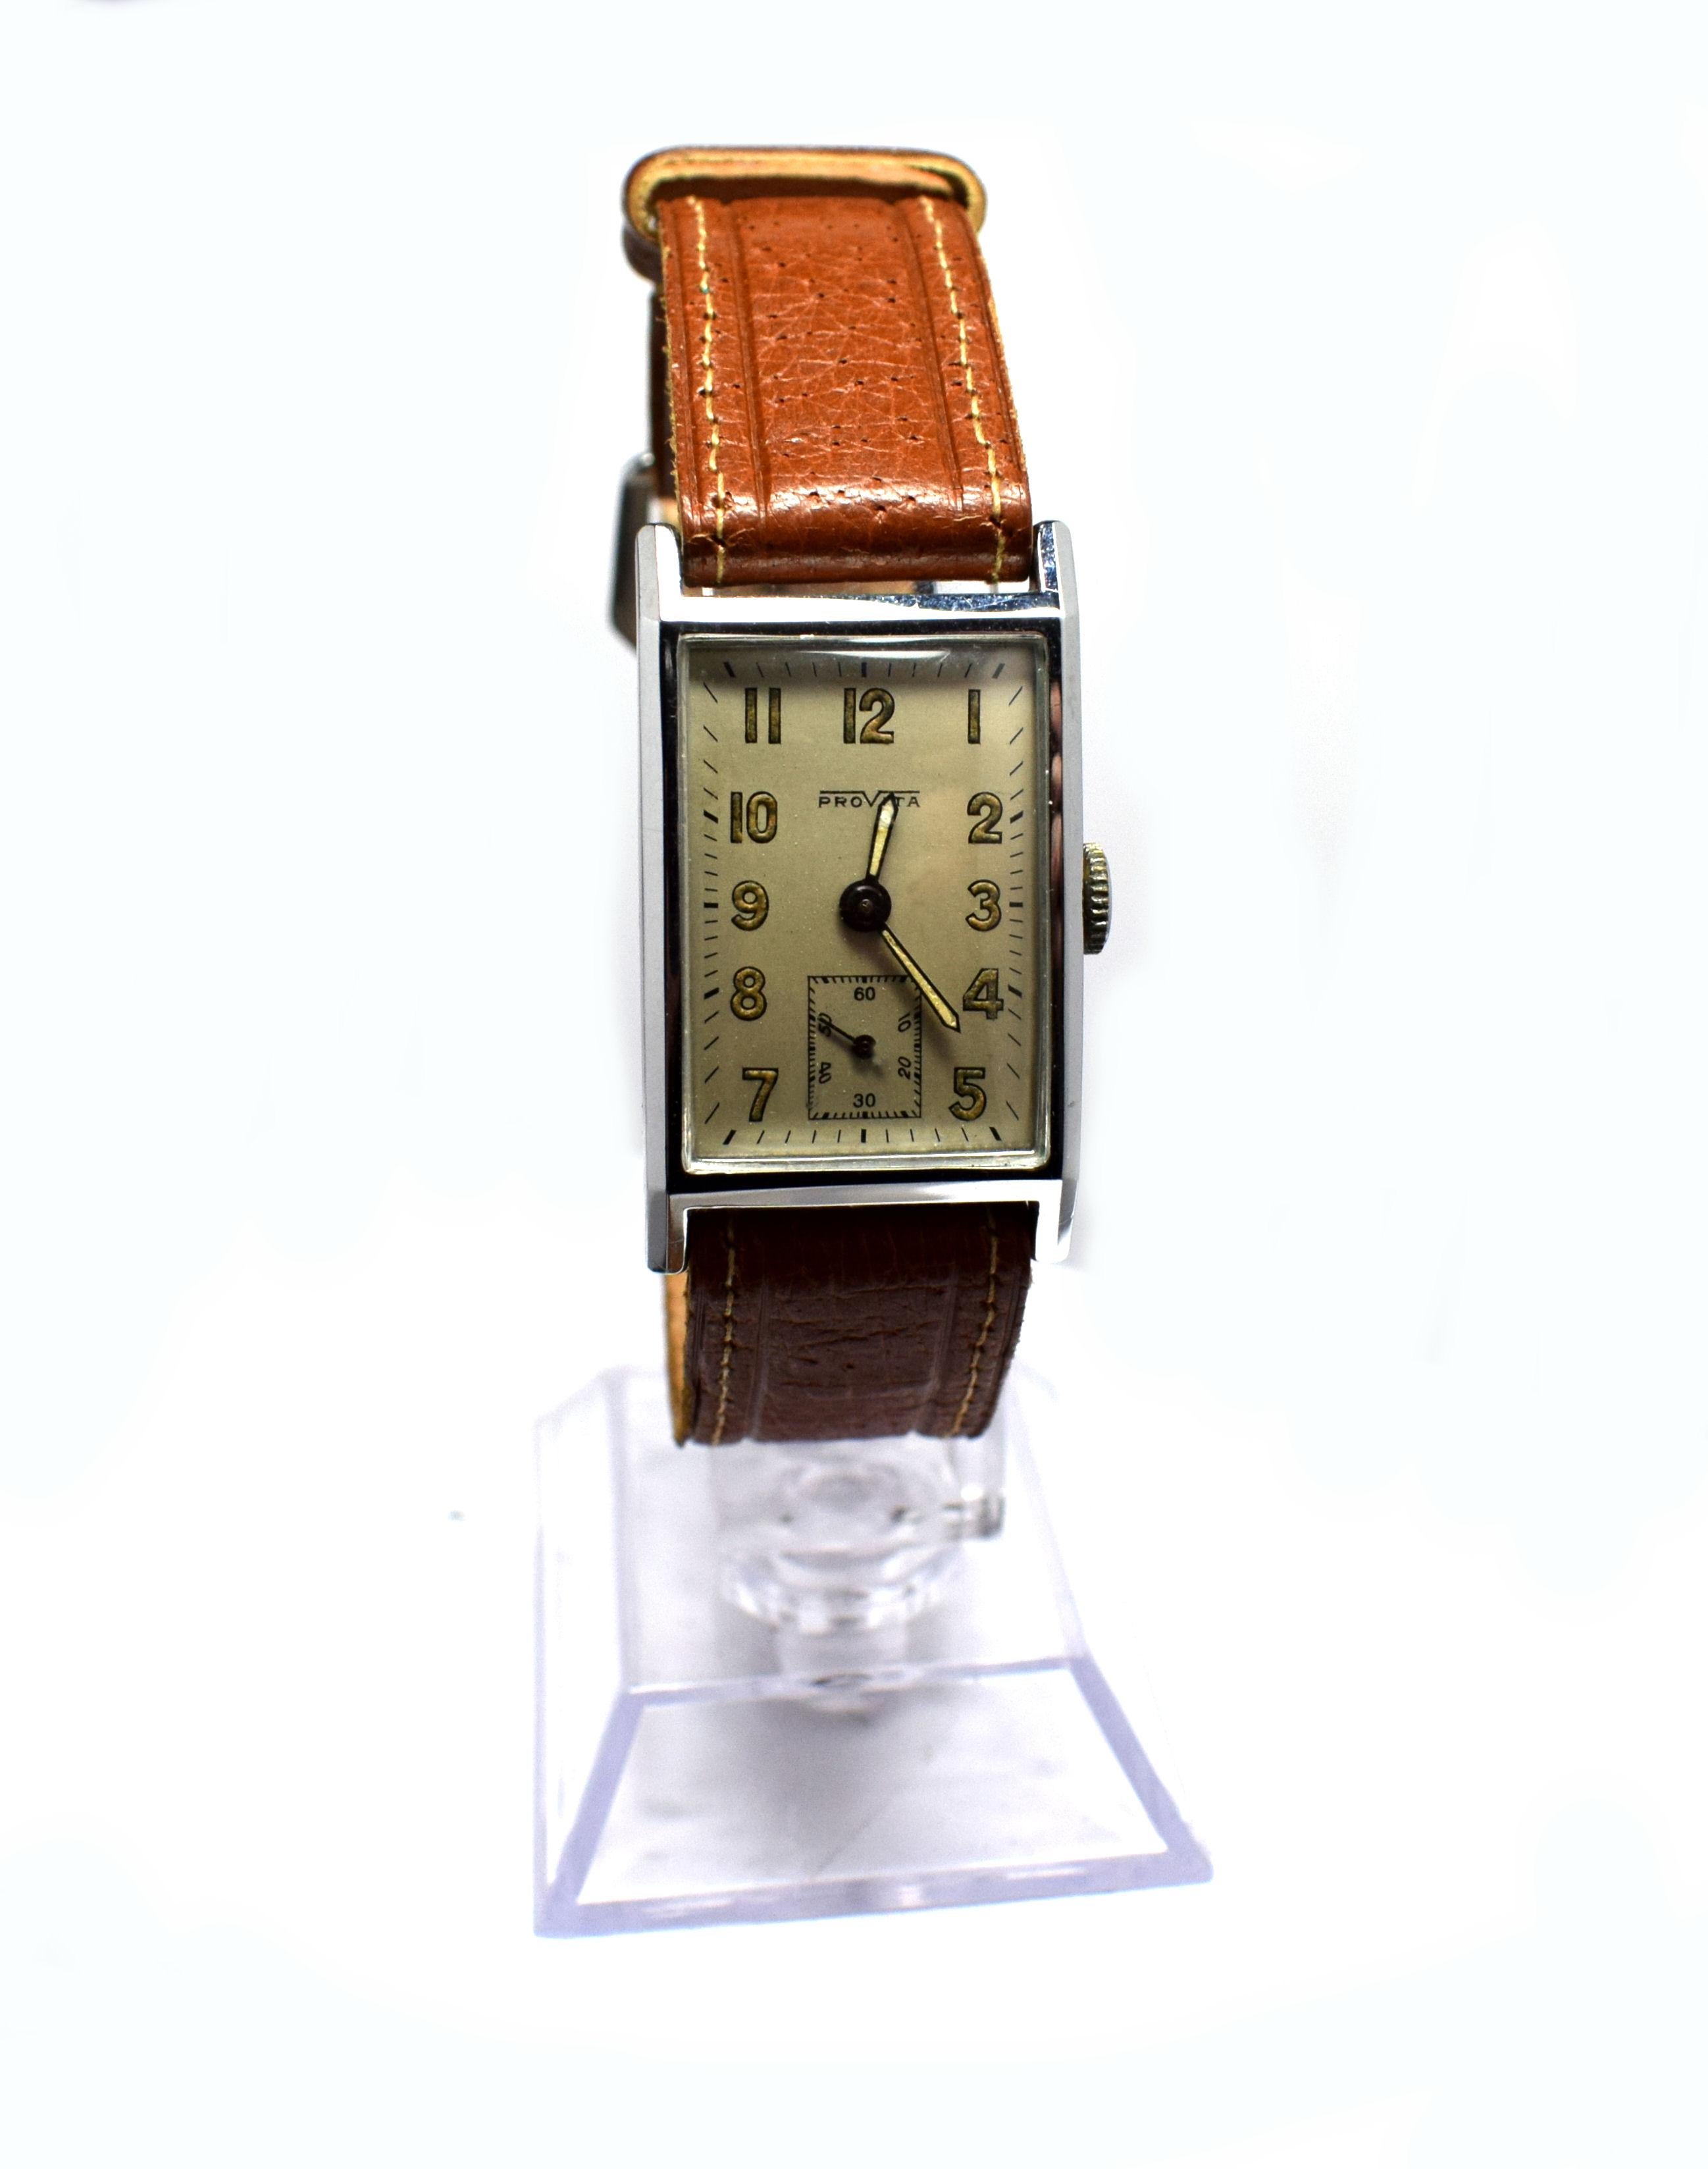 For your consideration is this very stylish Art Deco 1930's men's tank watch made by Provita a Swiss company. Beautiful condition through out, the chrome is as good as you could hope for. The dial shows little to no signs of it's age. Has a sweeping